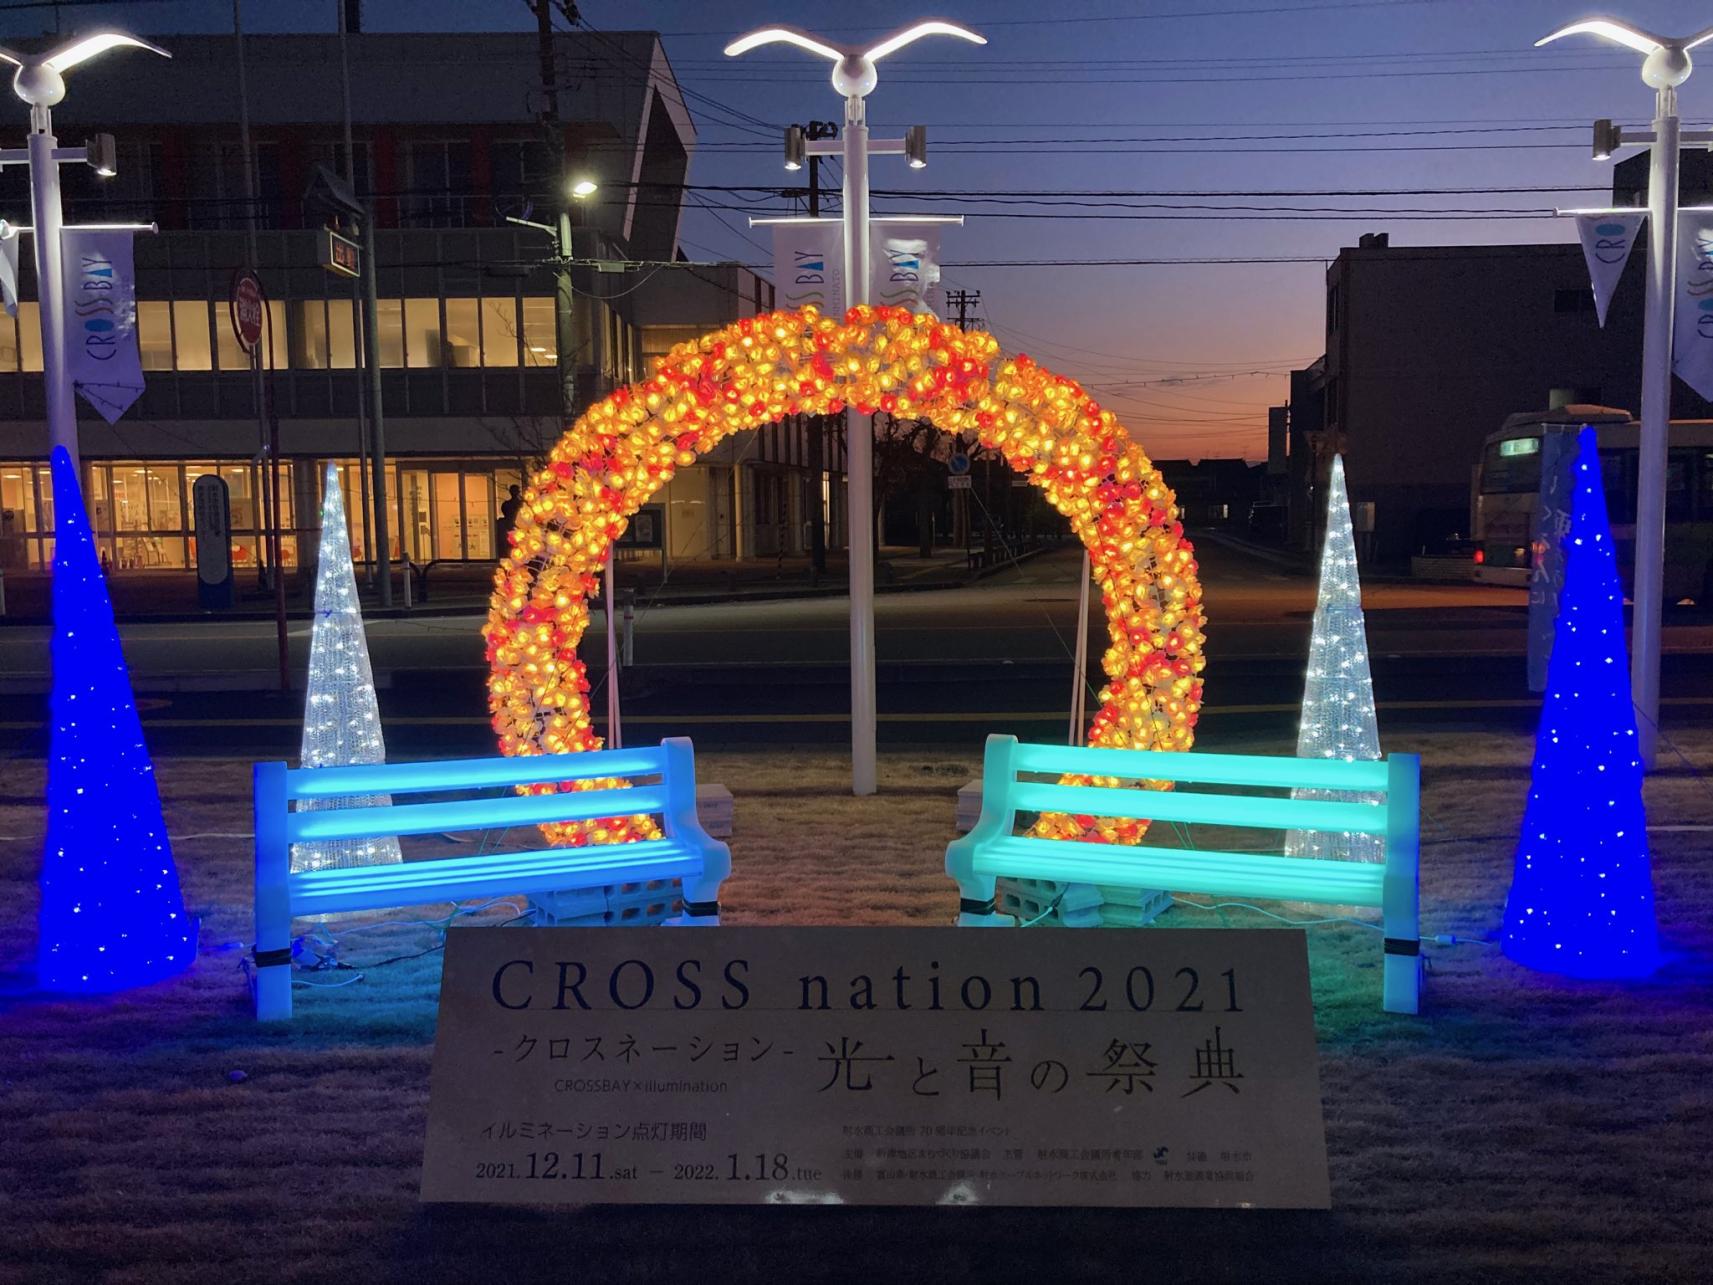 CROSS nation -クロスネーション-　Let's create a festival of light together-3